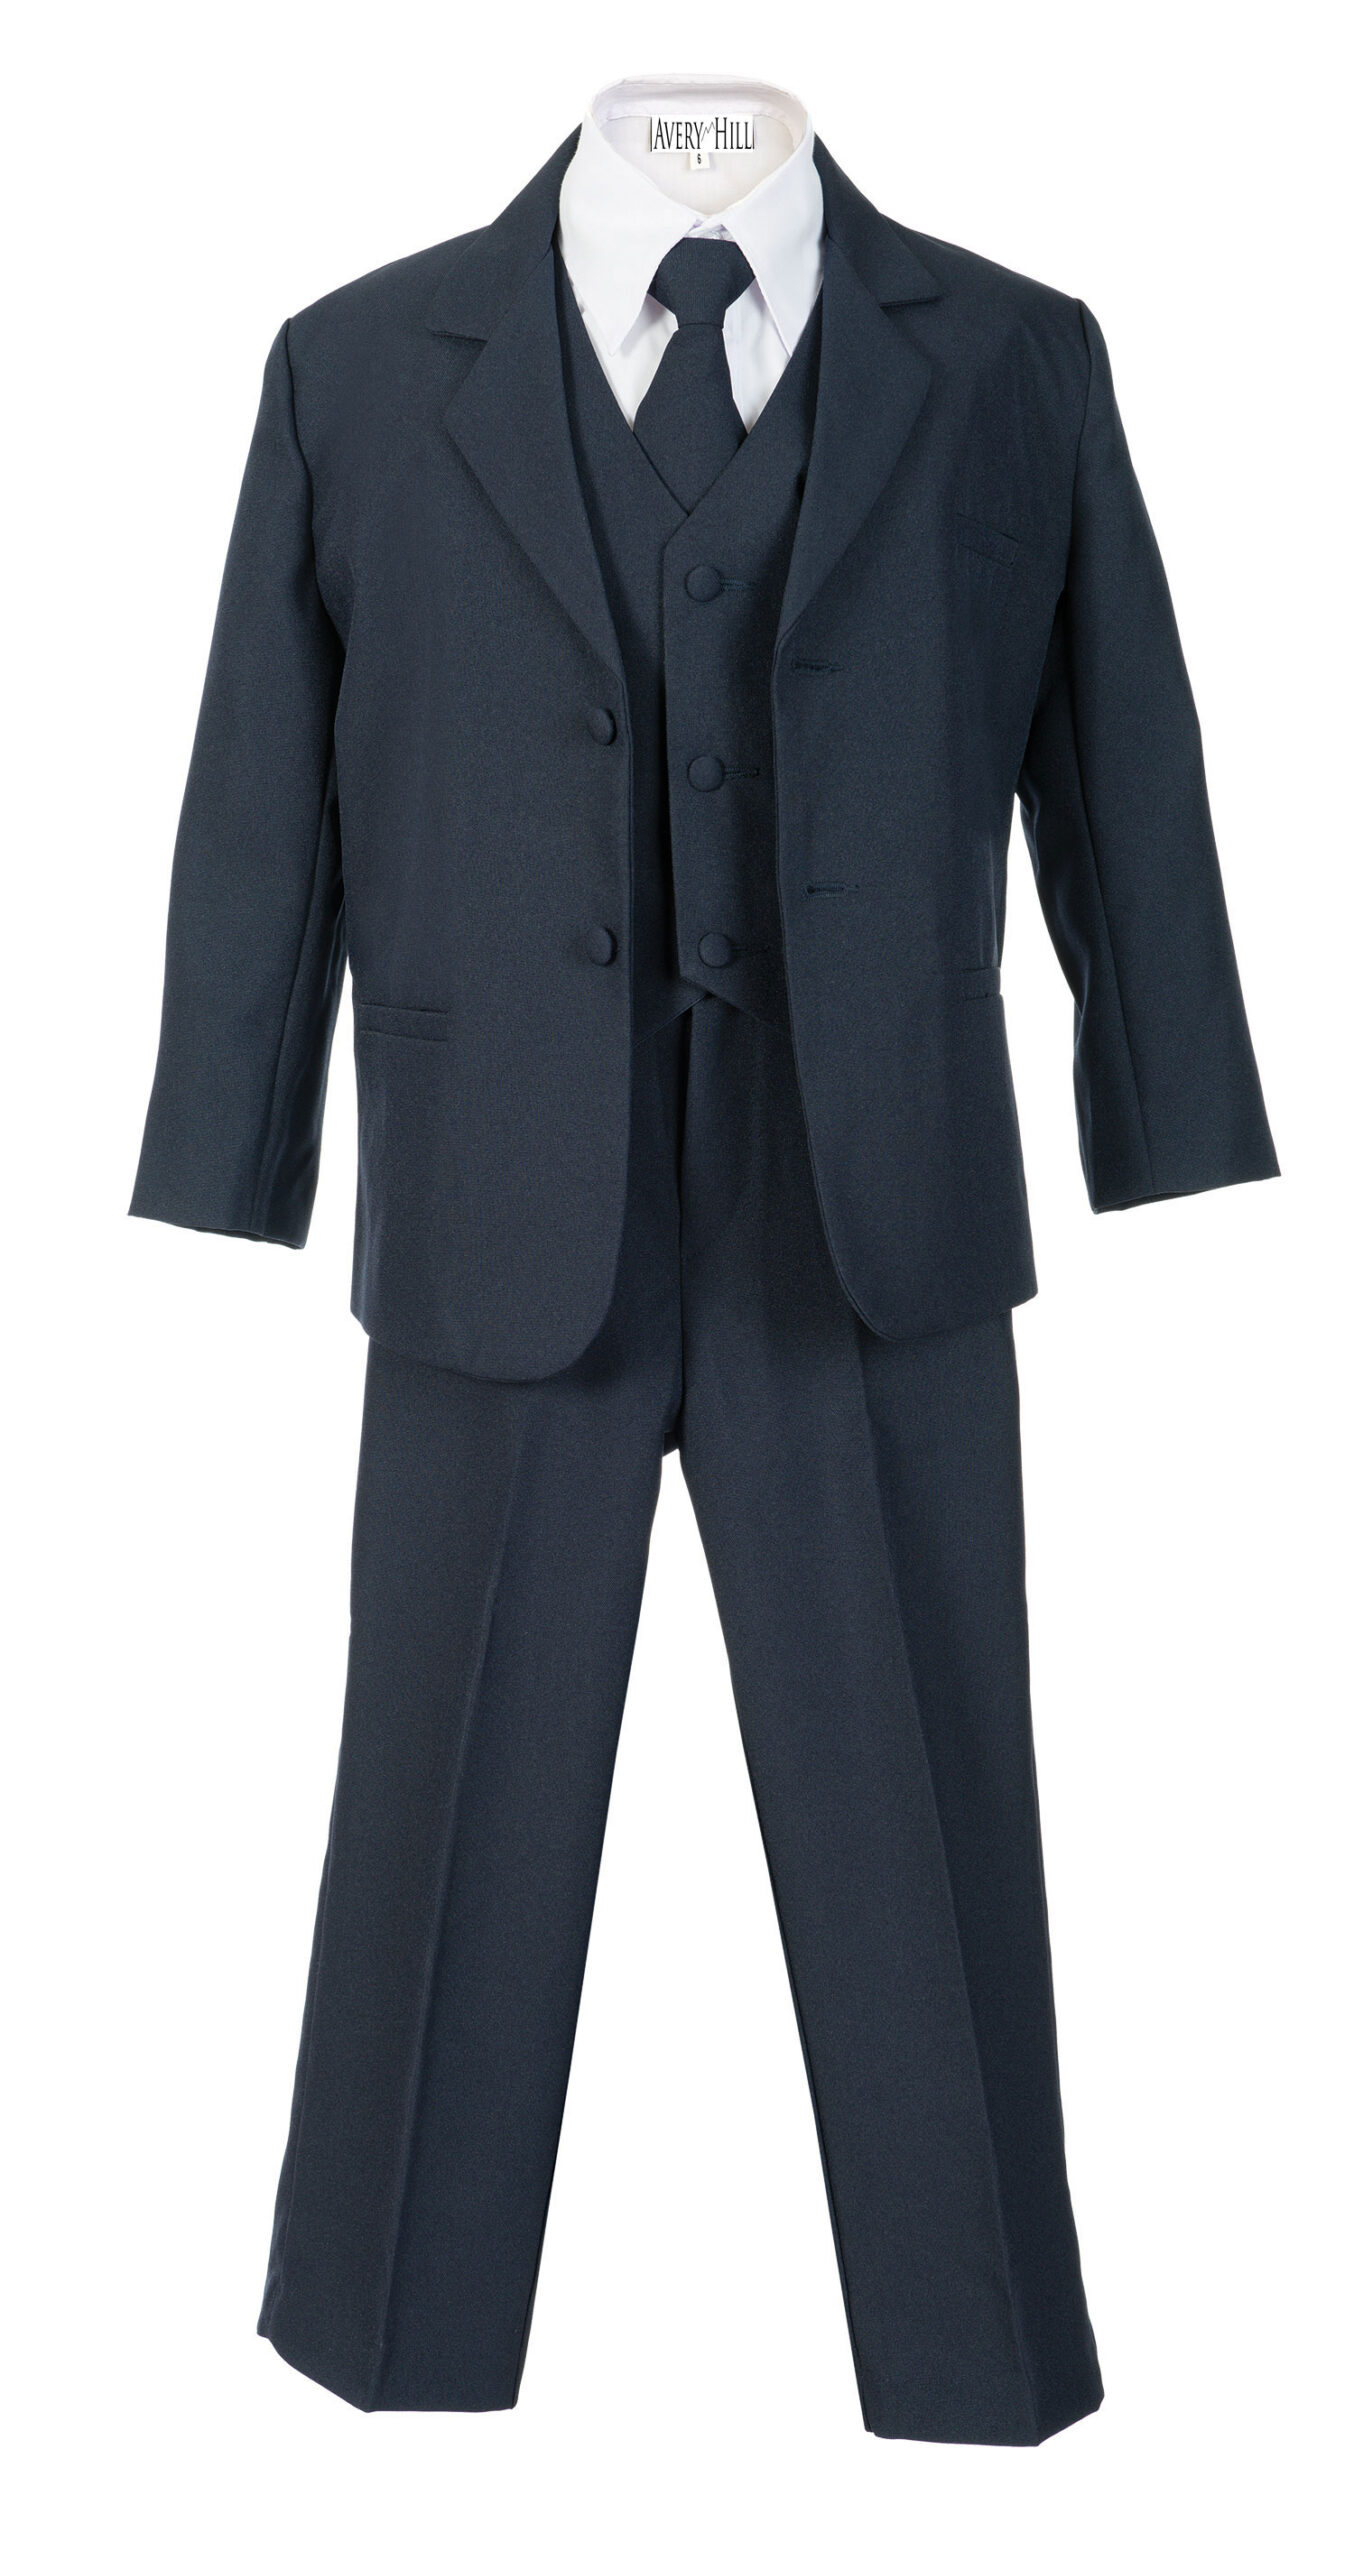 Avery Hill Boys Formal 5 Piece Suit with Shirt and Vest Navy - 8